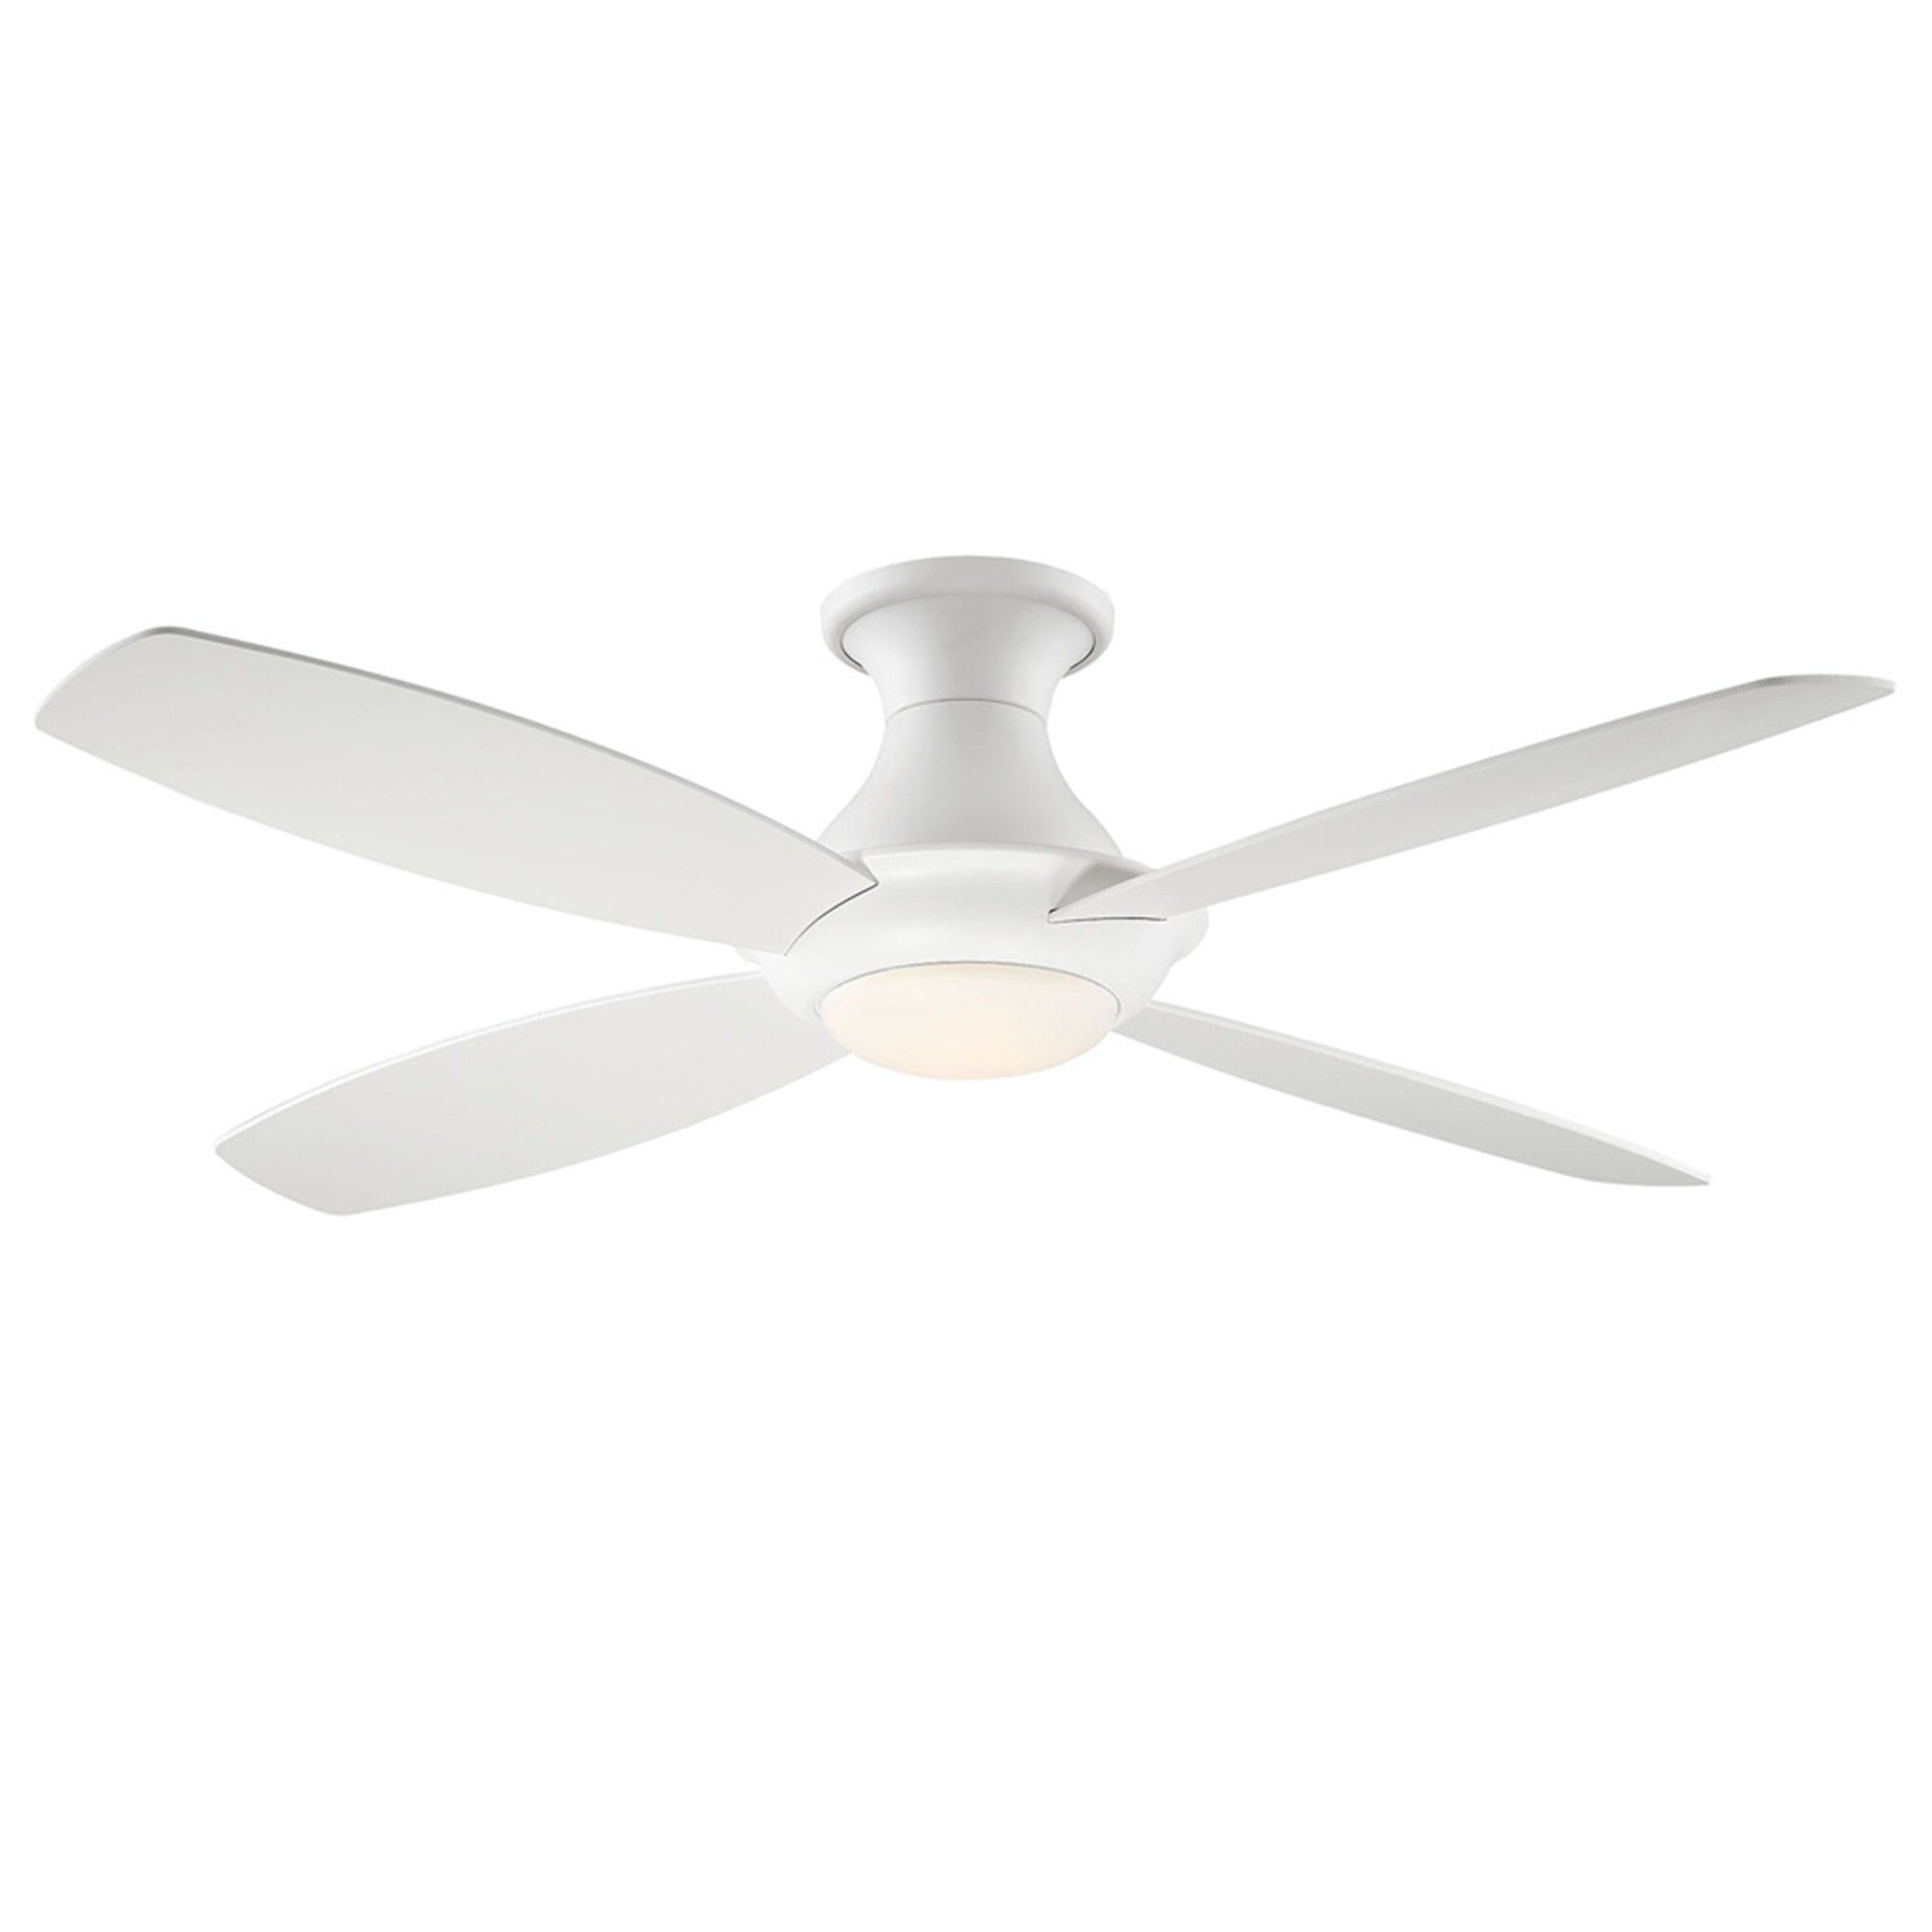 Latest Gean 4 Blade Led Ceiling Fan With Remote, Light Kit Included Pertaining To Cedarton Hugger 5 Blade Led Ceiling Fans (Photo 18 of 20)